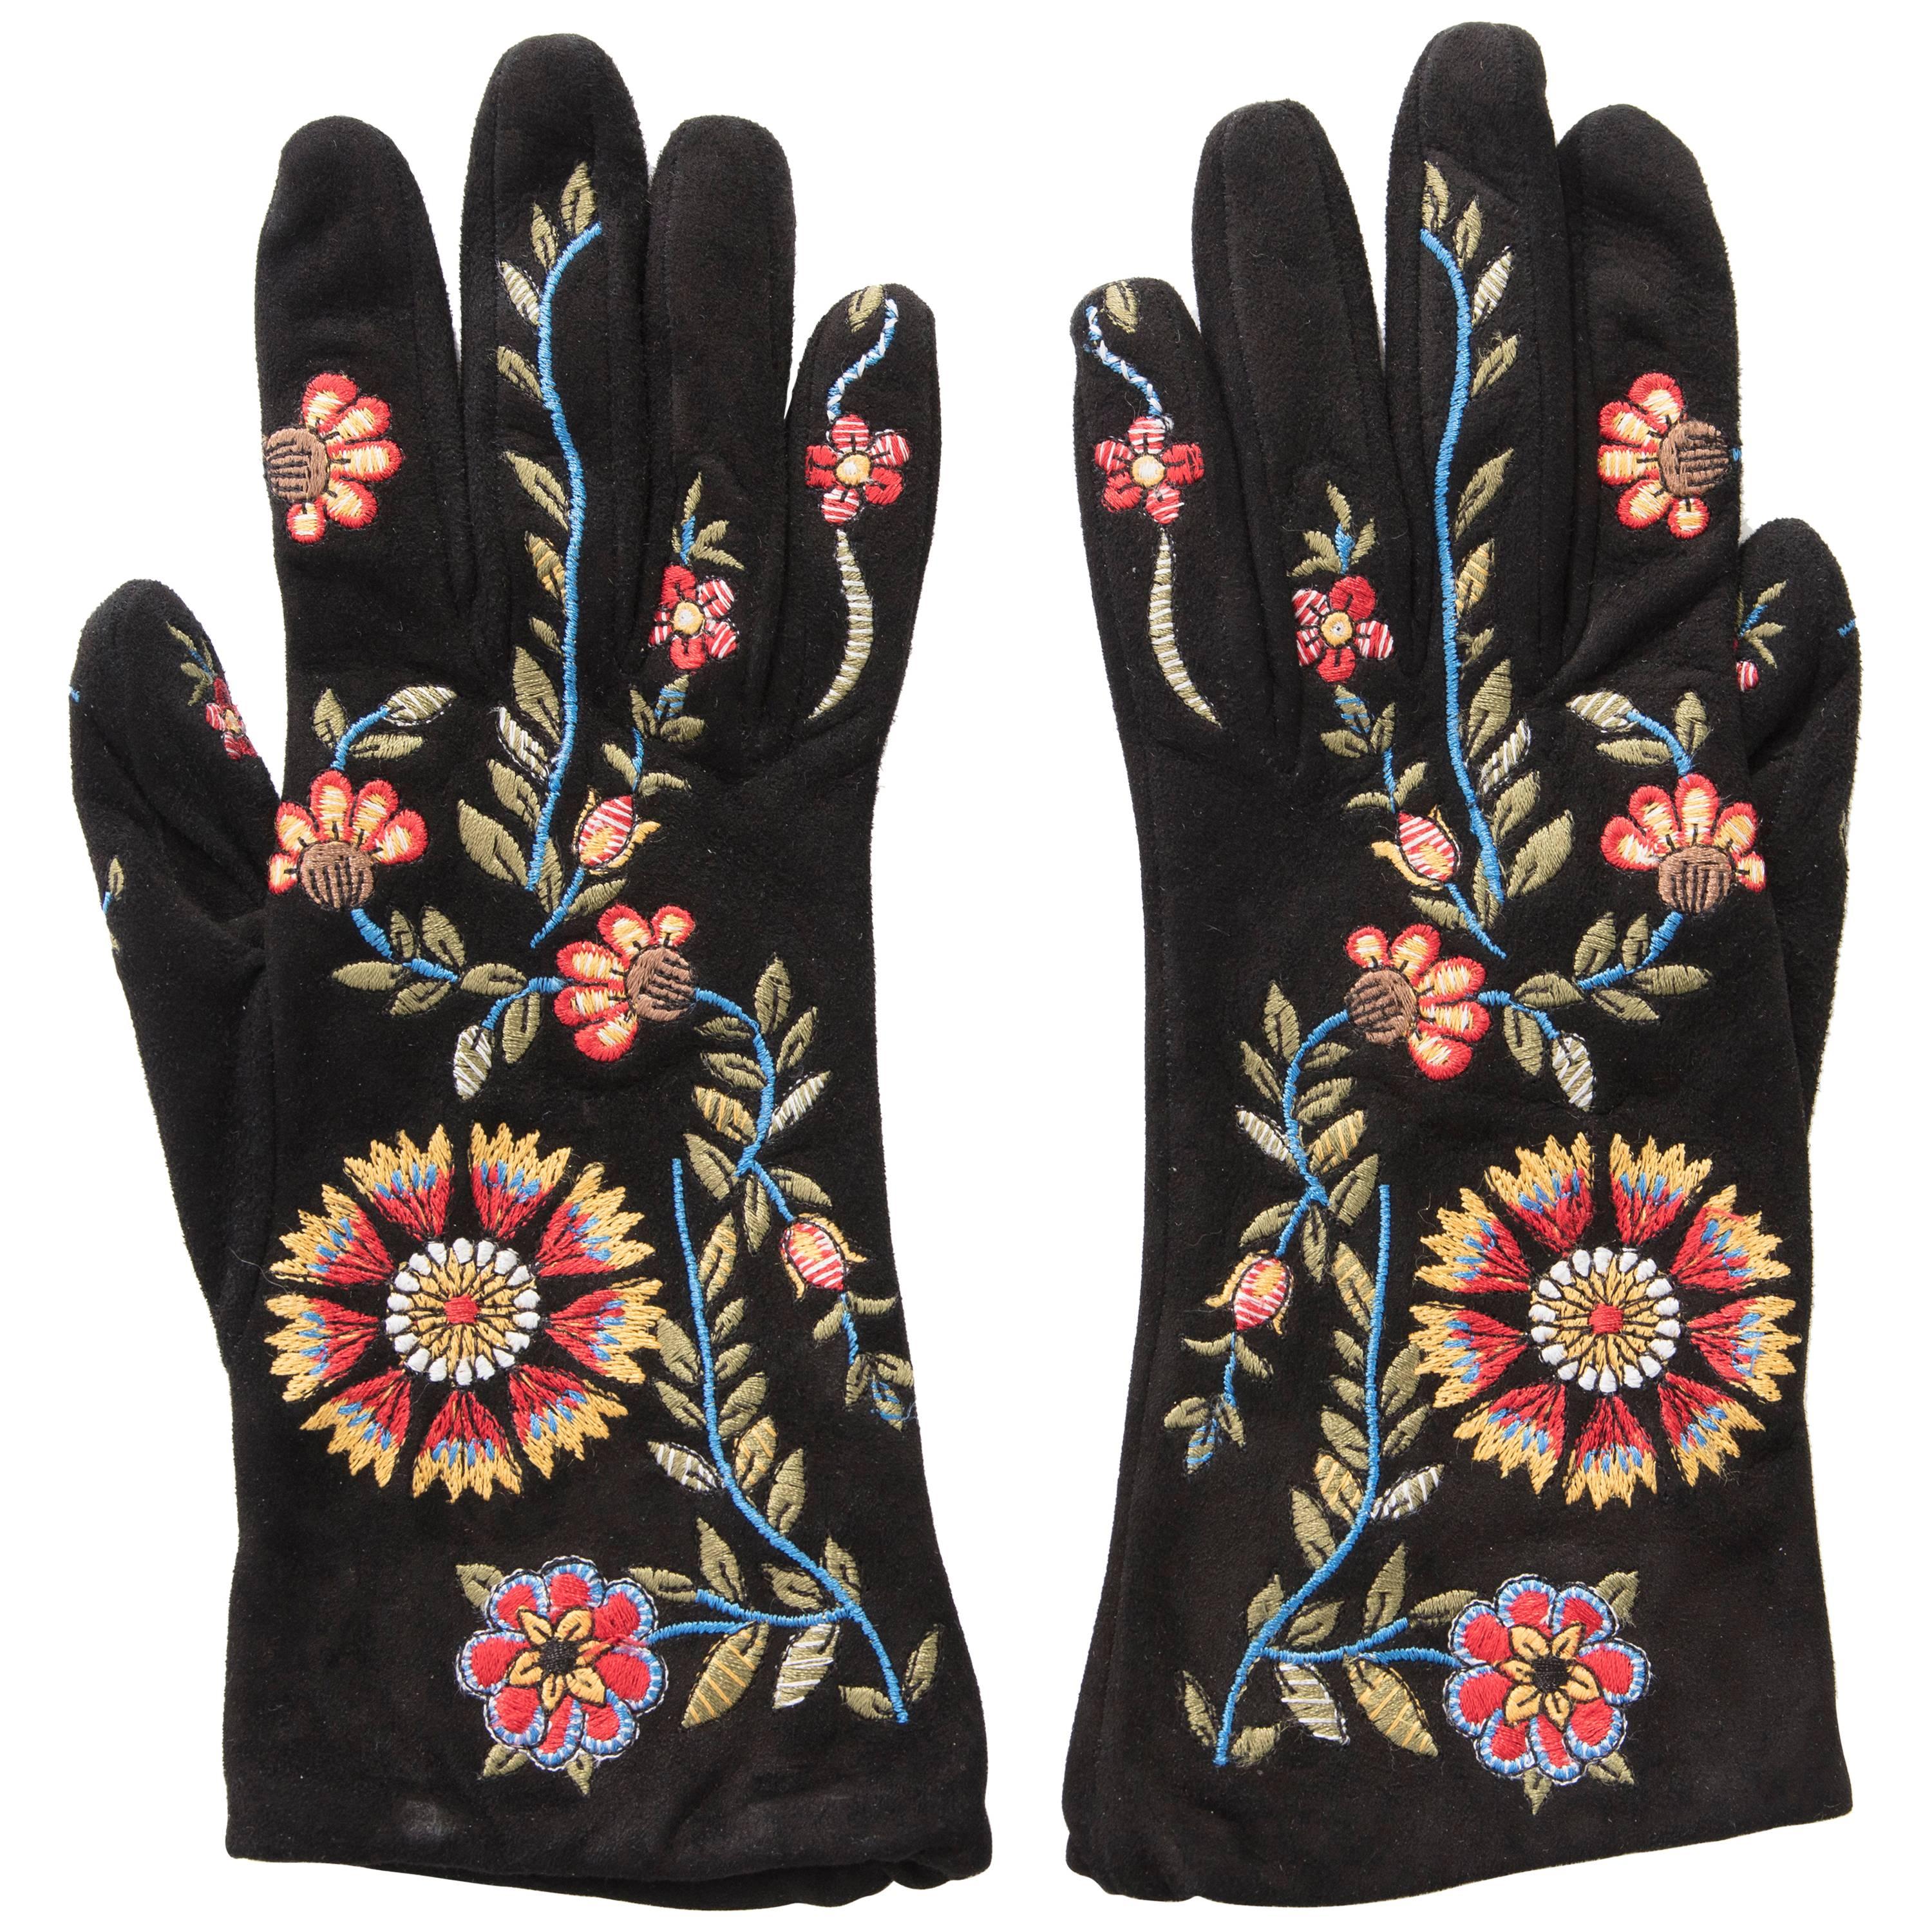 John Galliano For Christian Dior Black Suede Embroidered Gloves 